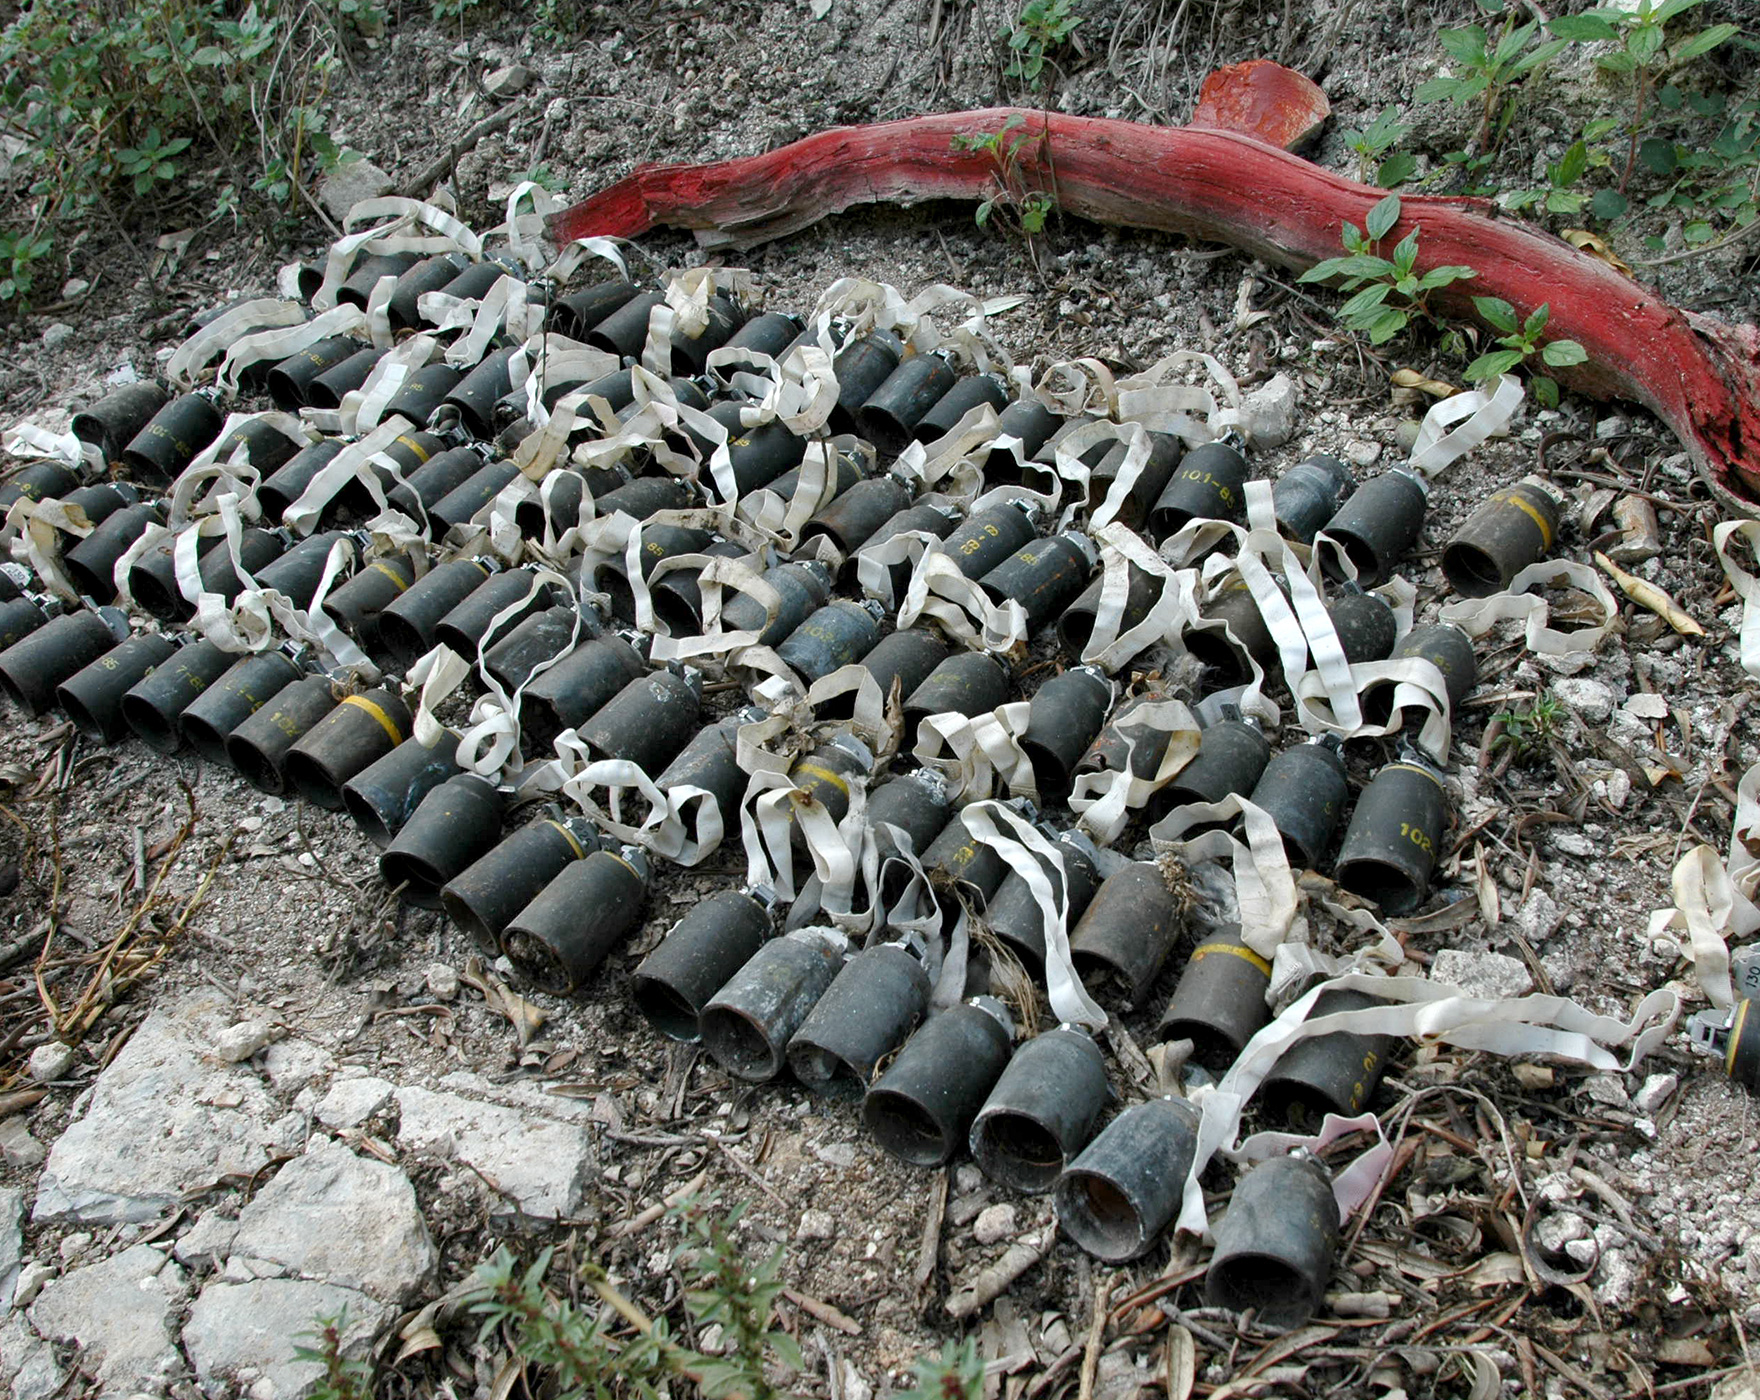 M85 cluster munitions gathered on the ground.